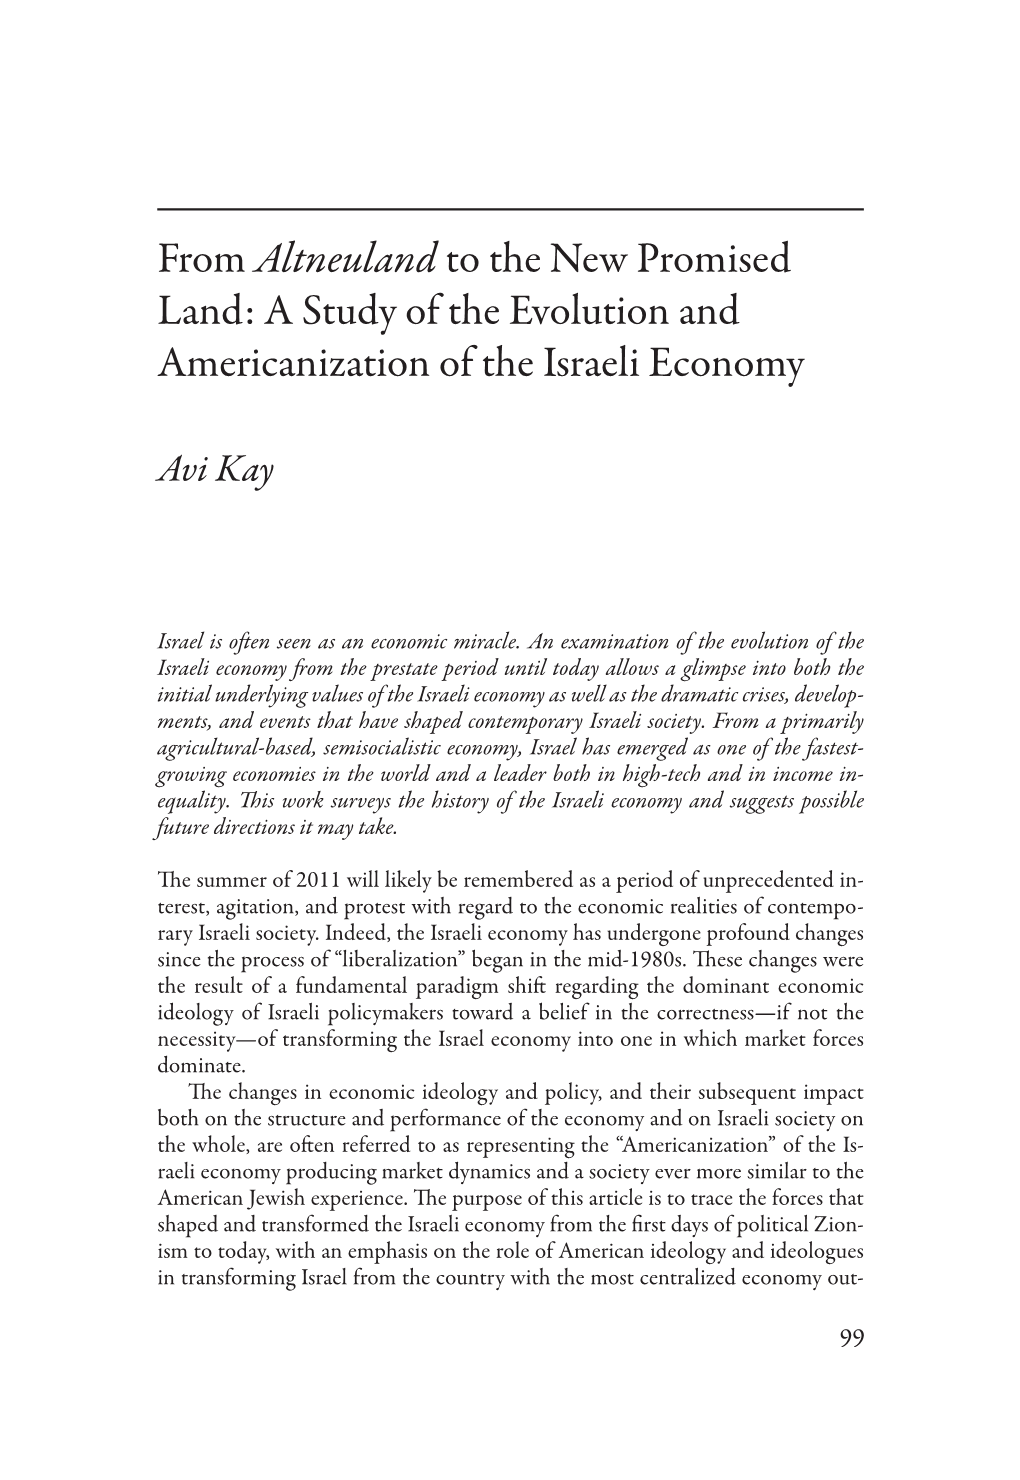 From Altneuland to the New Promised Land: a Study of the Evolution and Americanization of the Israeli Economy